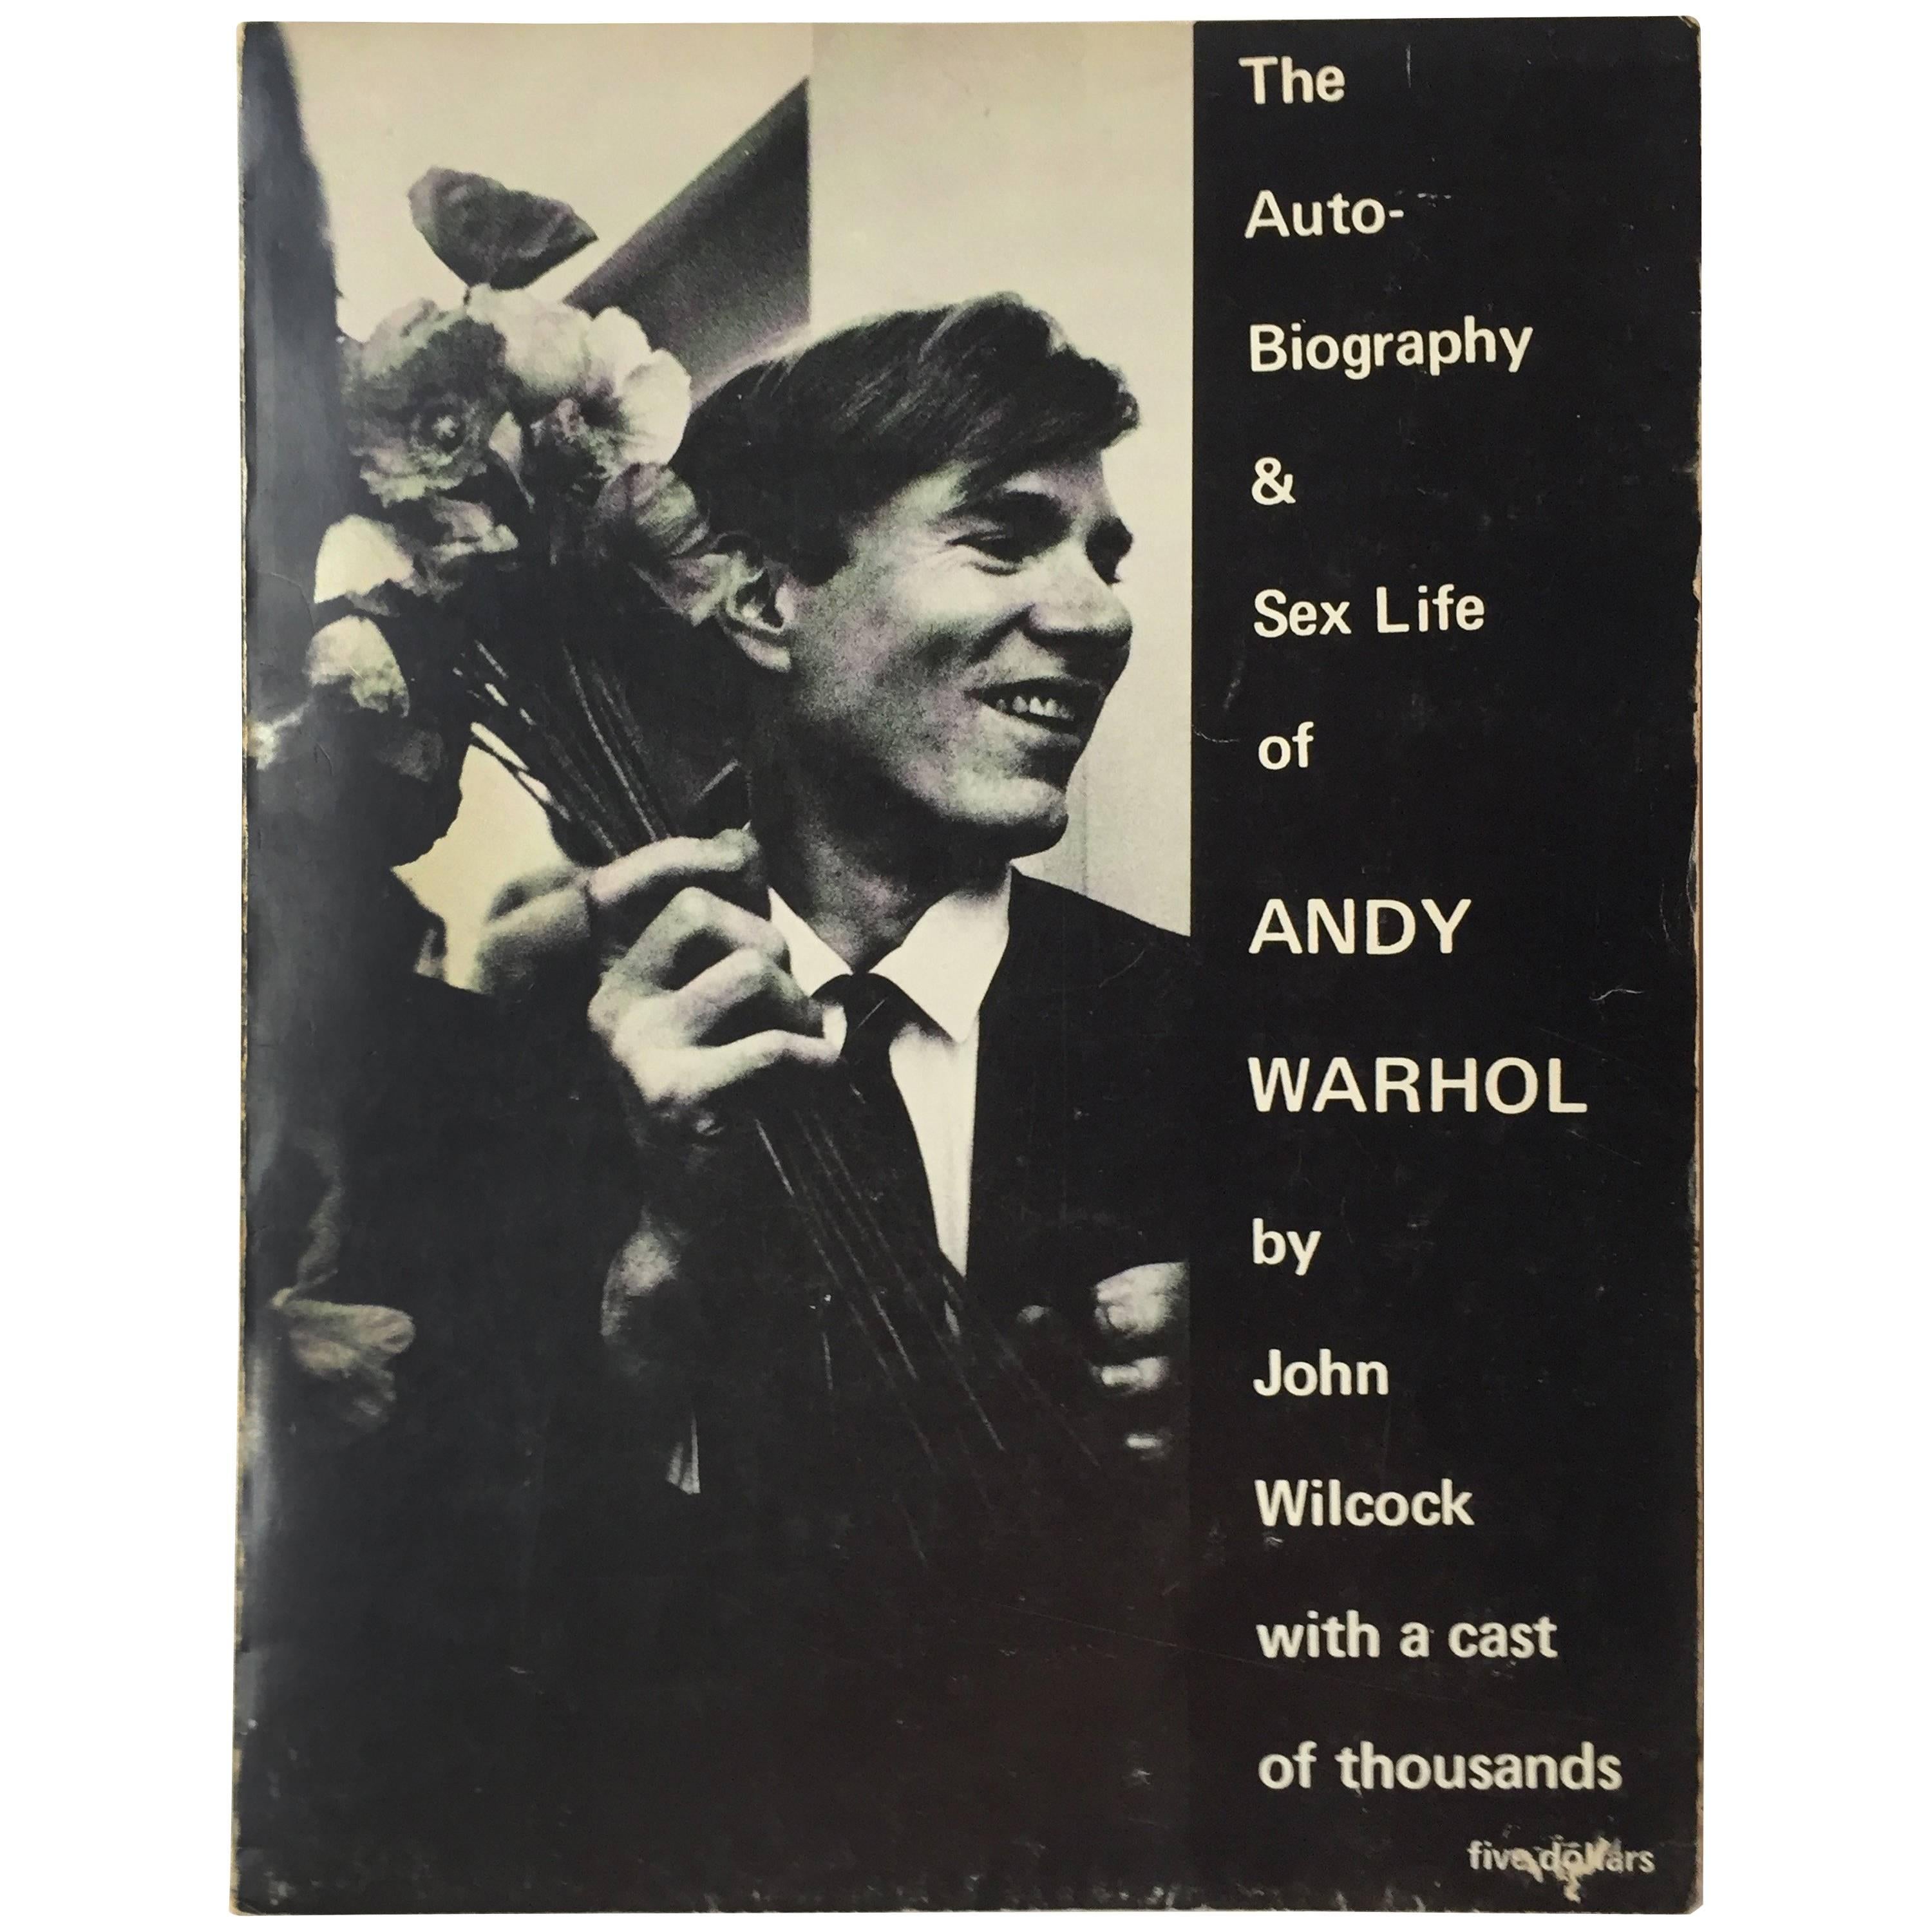 John Wilcock –The Autobiography & Sex Life of Andy Warhol